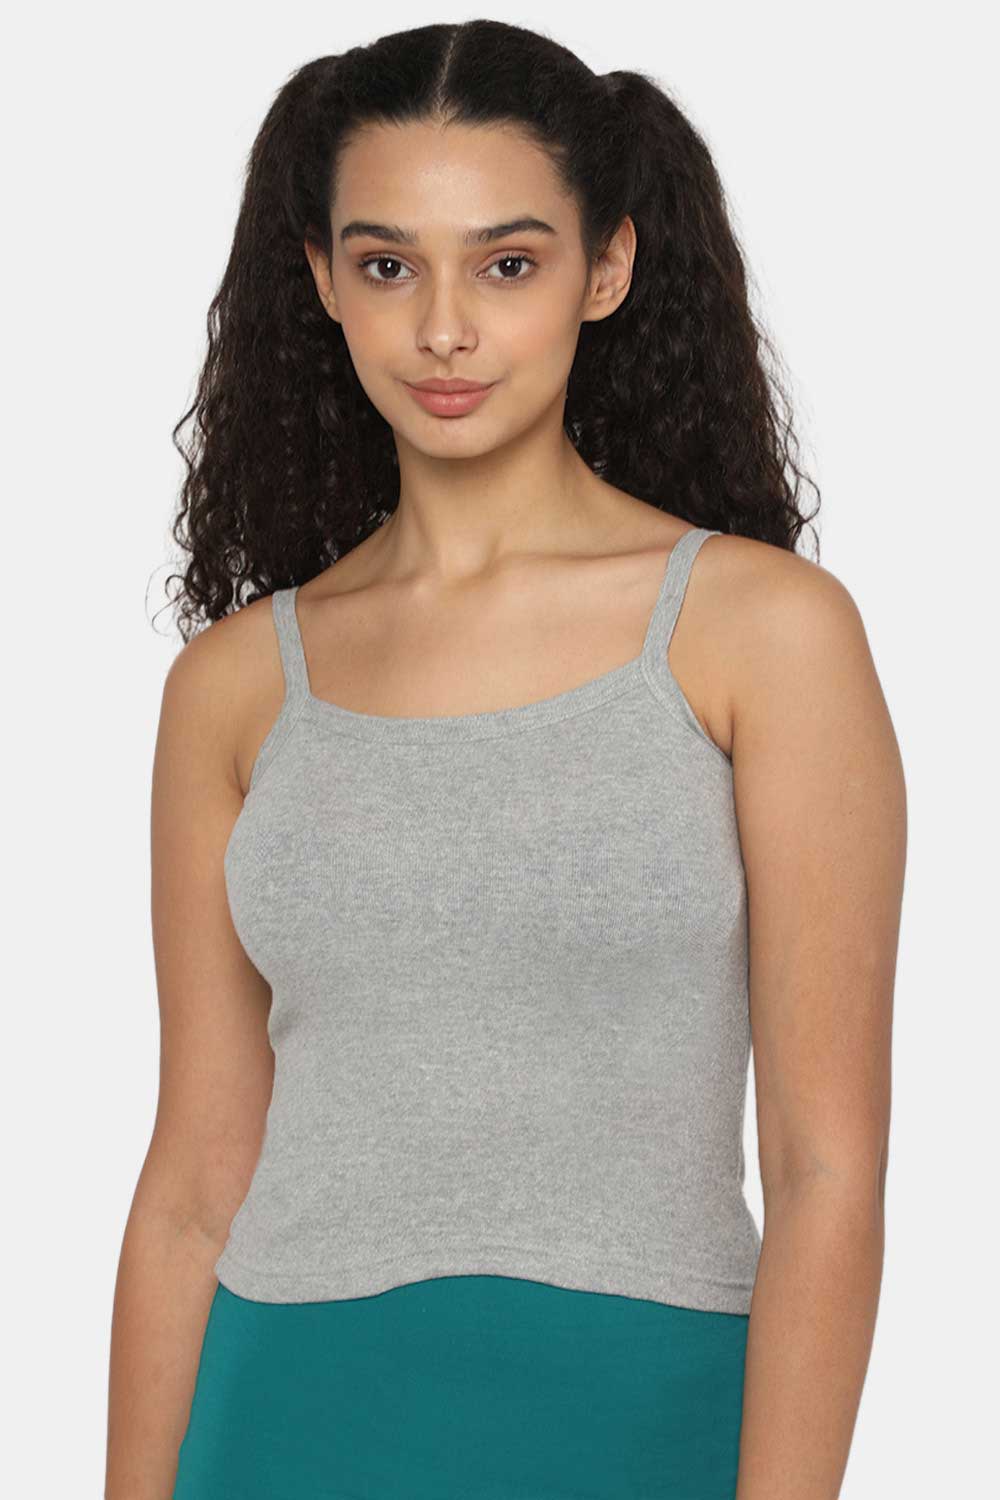 Intimacy Camisole-Slip Special Combo Pack - In01 - Pack of 3 - C53